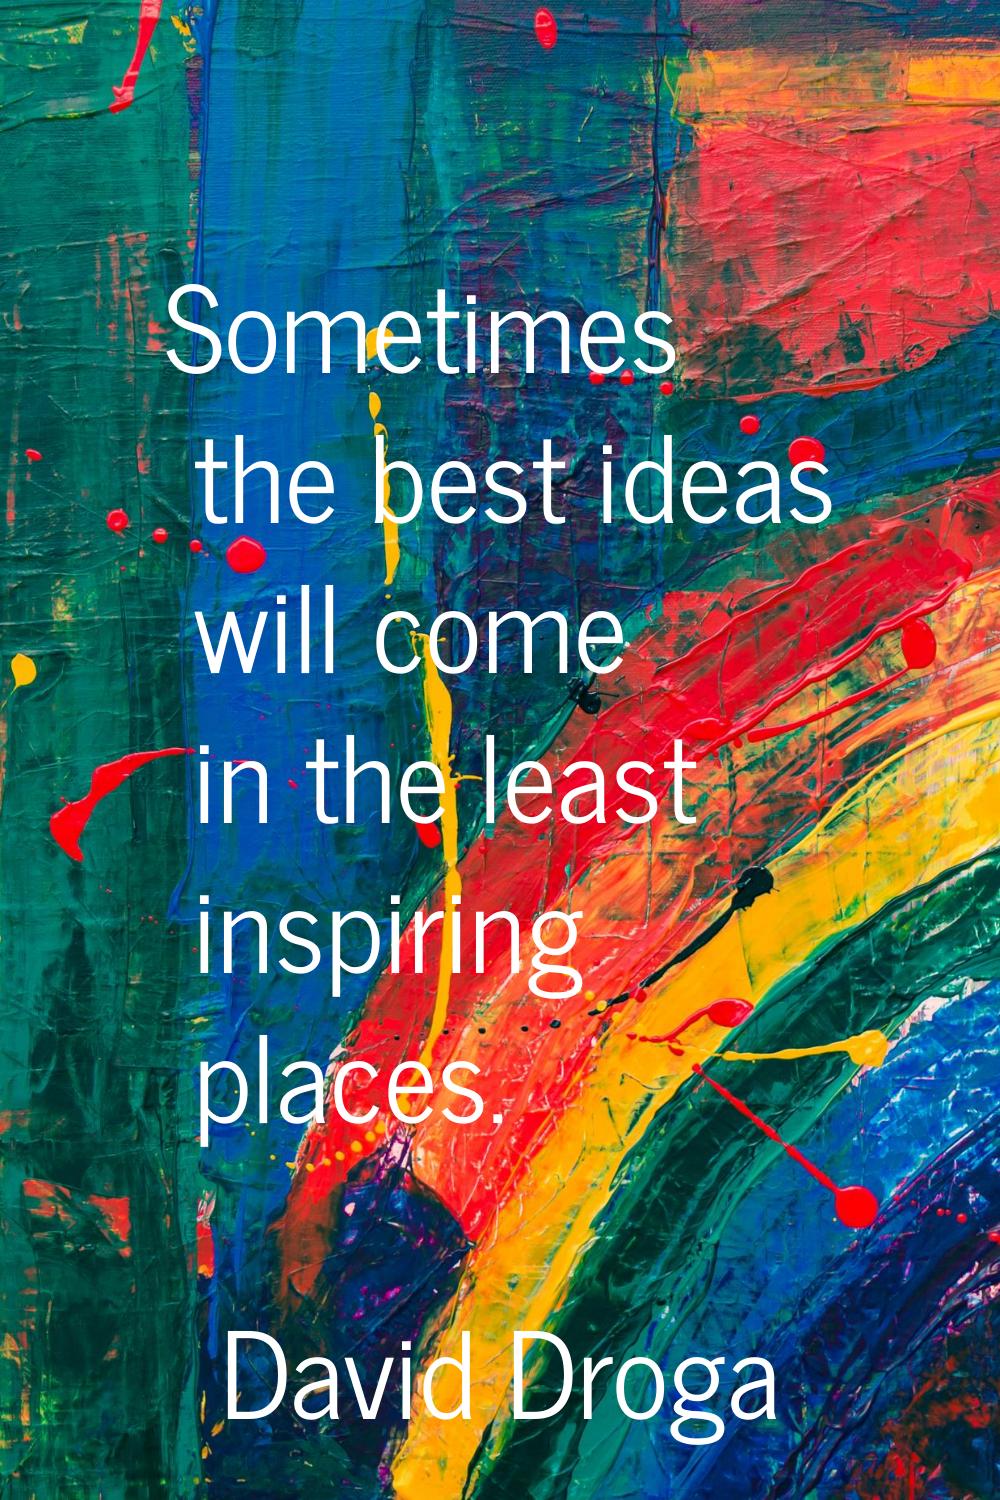 Sometimes the best ideas will come in the least inspiring places.